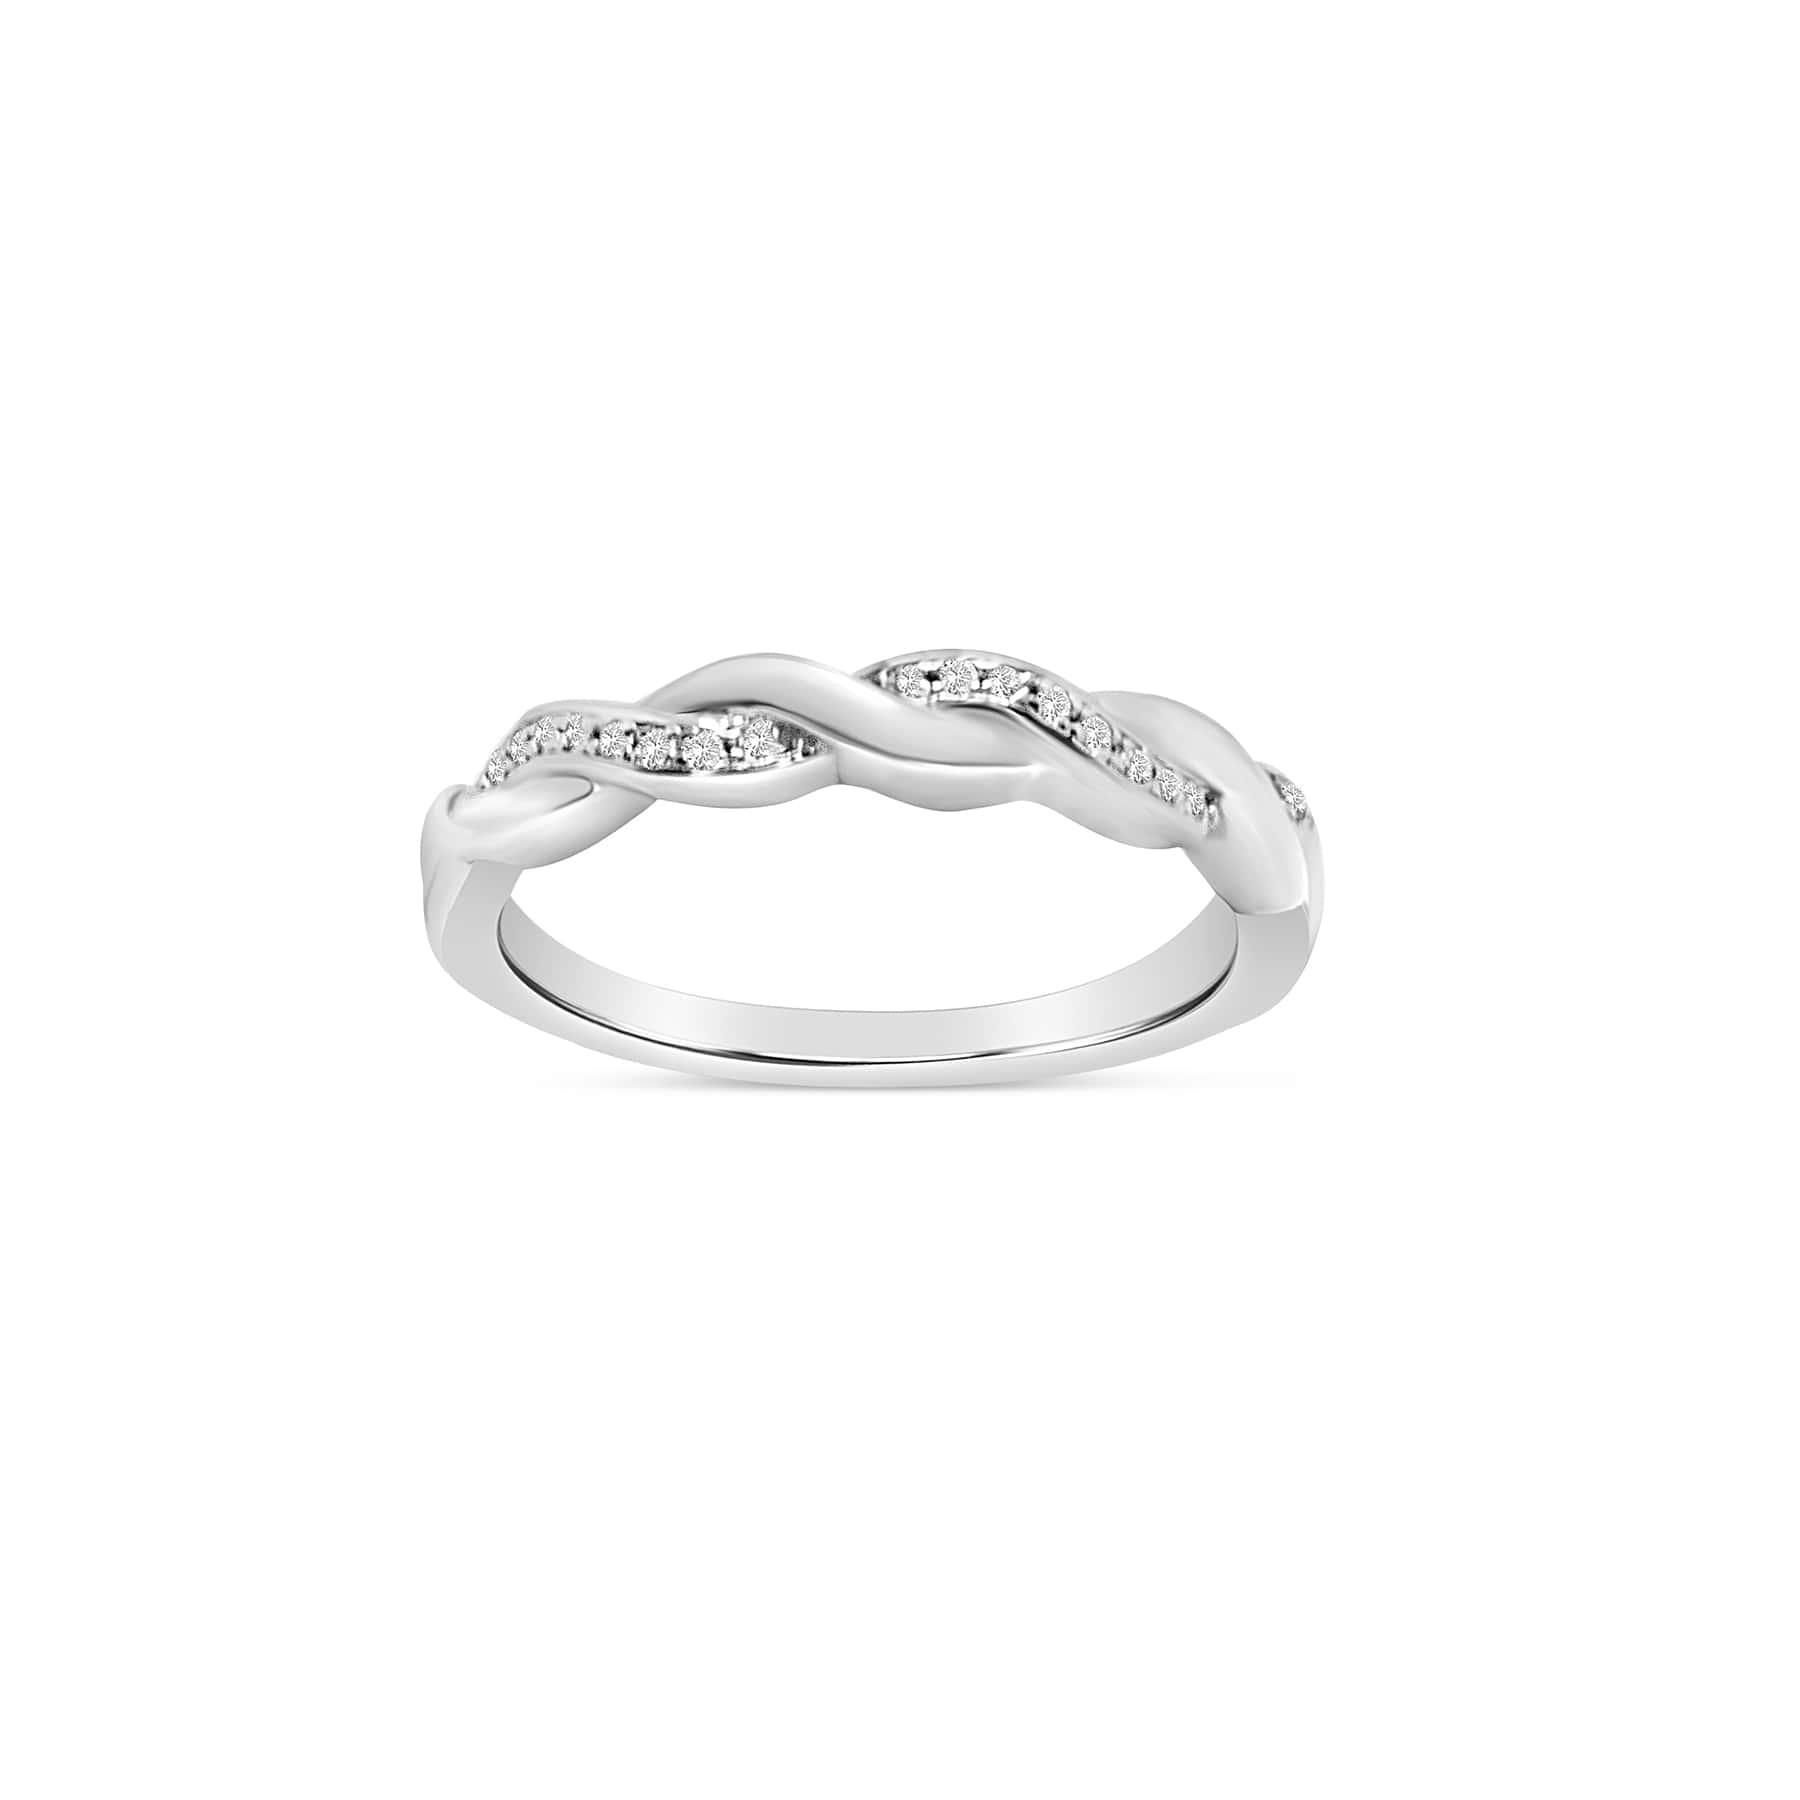 braided-clear-cubic-zironconia-ring-angle